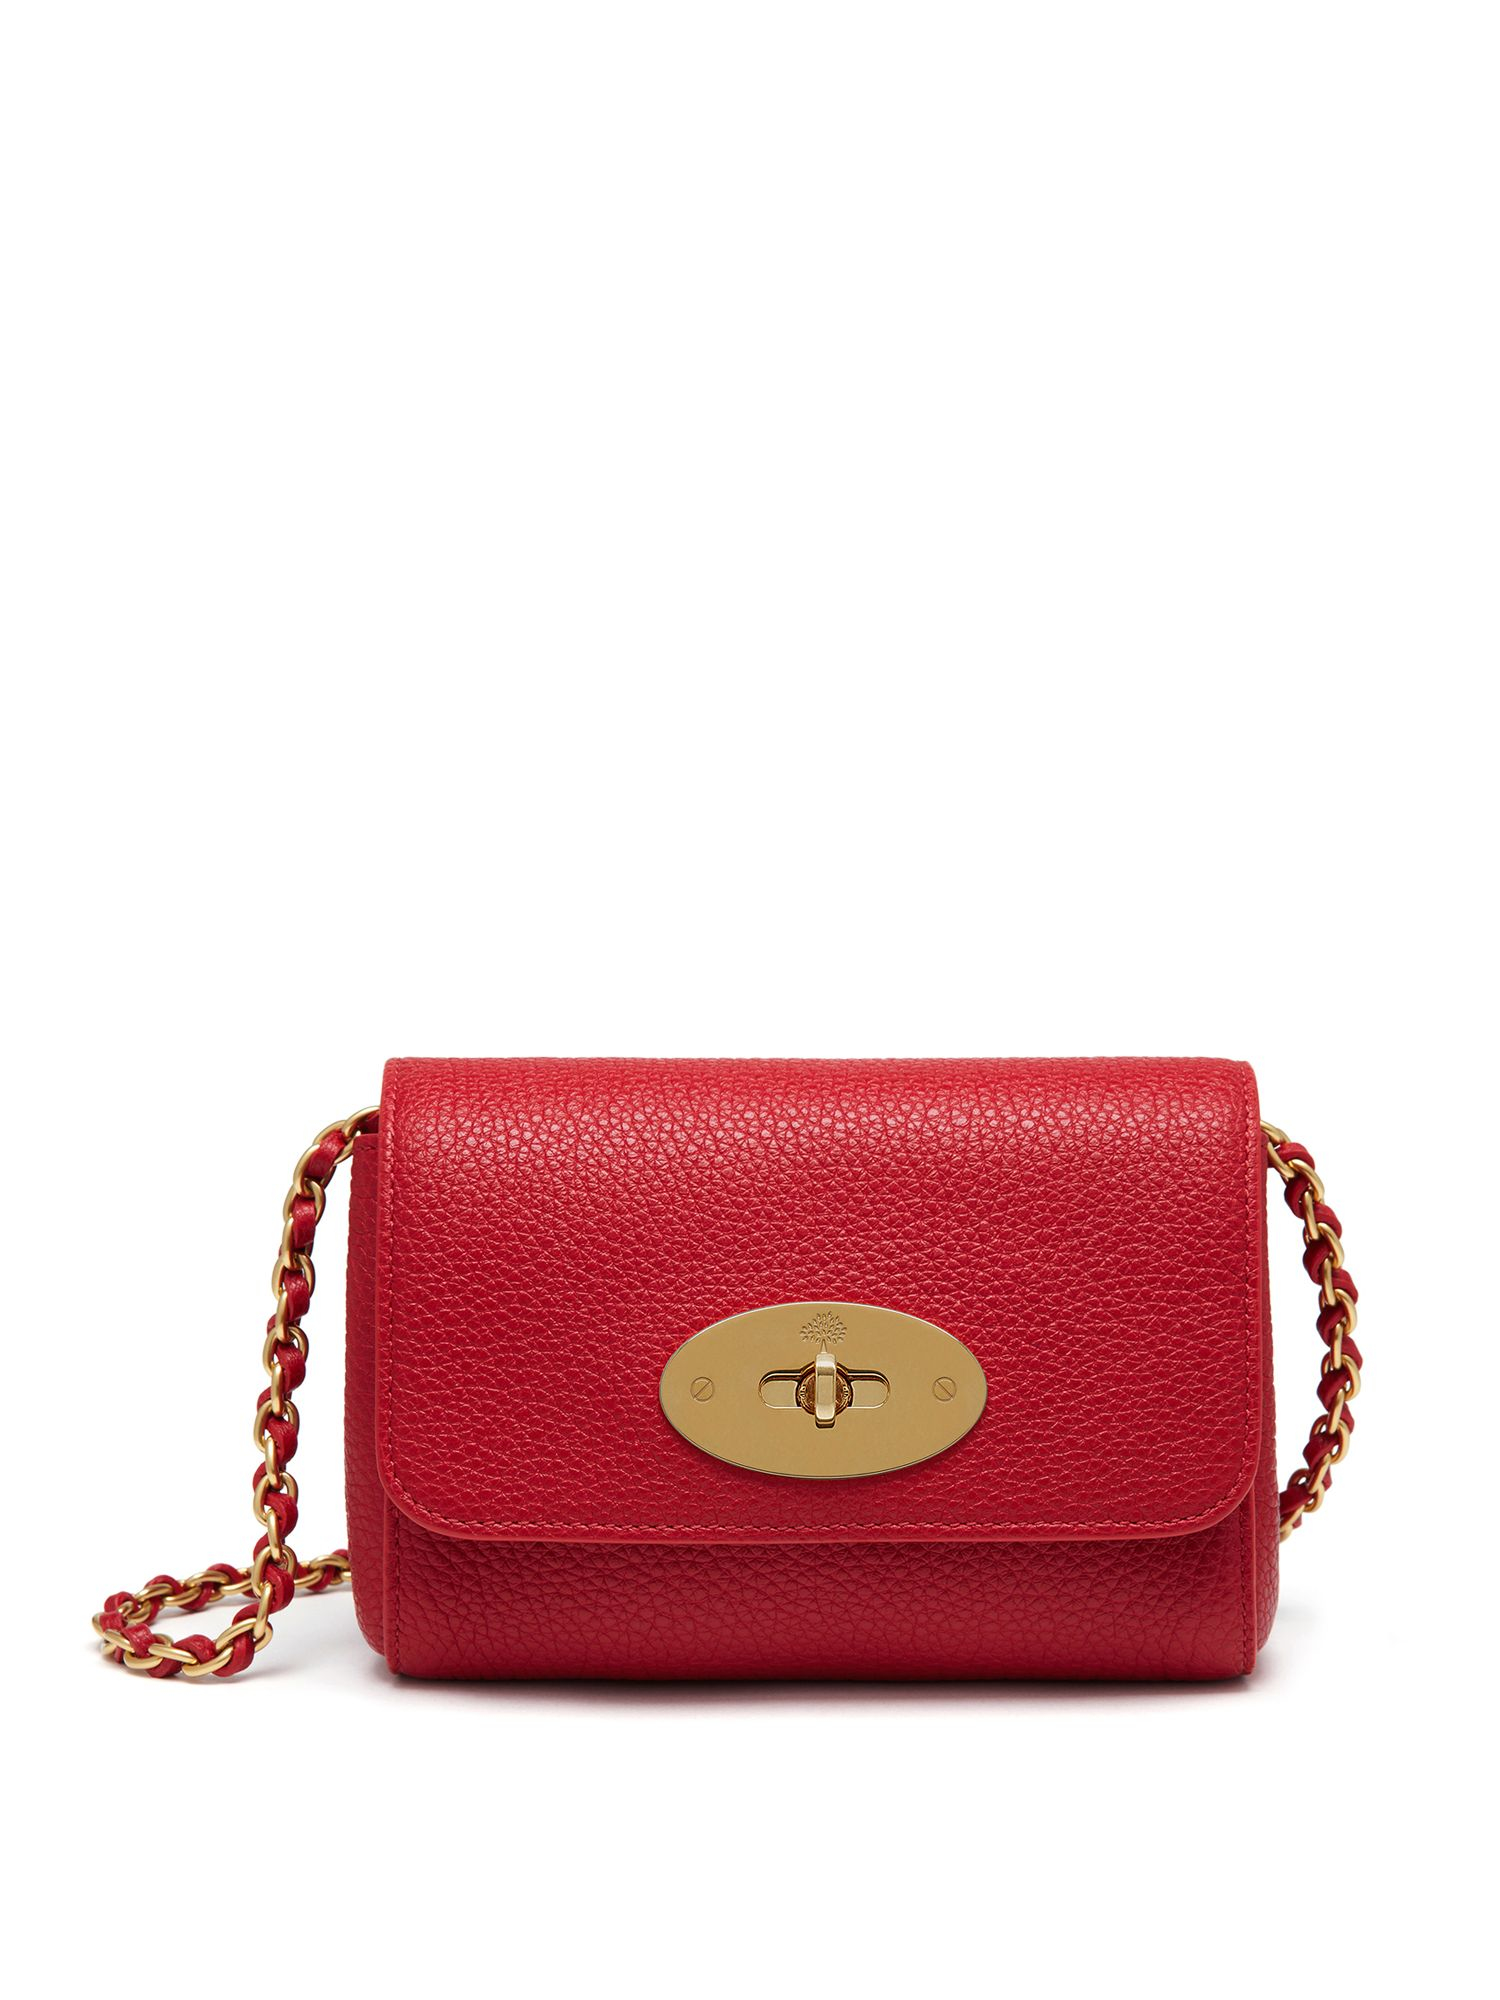 Mulberry Mini Lily Shoulder Bag in Red (Scarlet) | Lyst